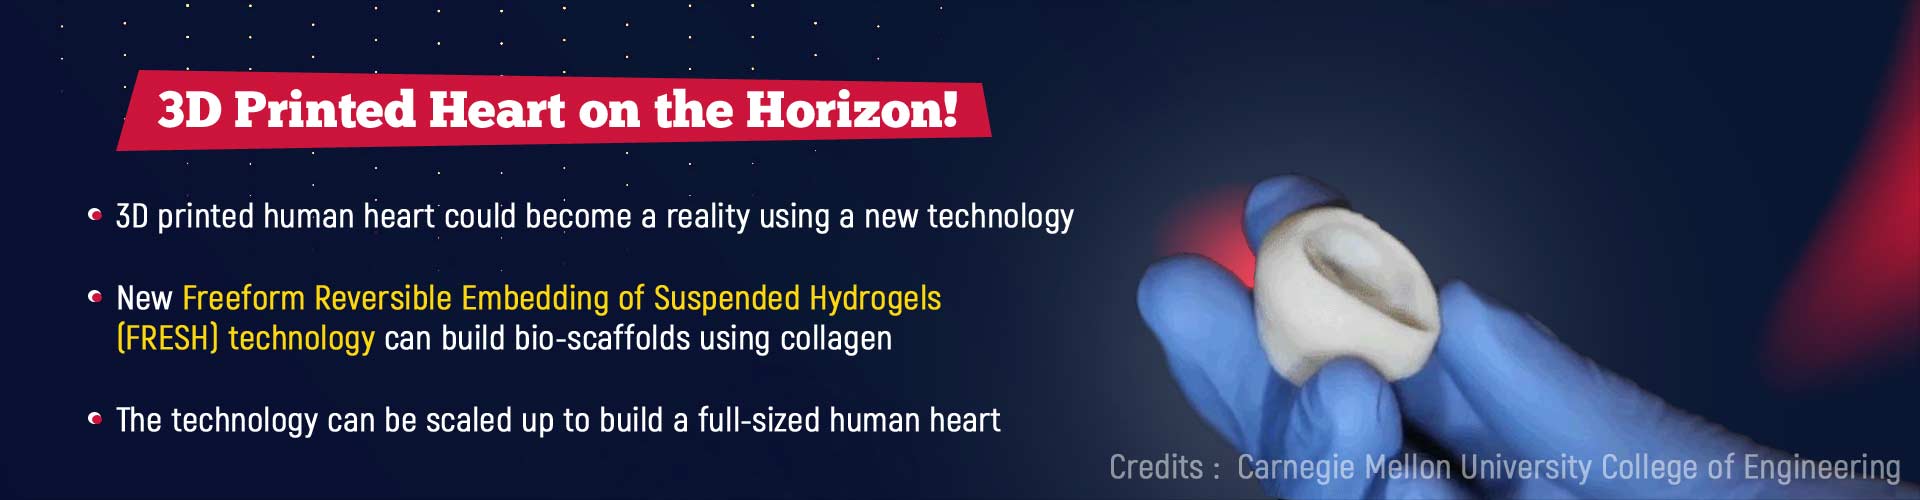 3D printed heart on the horizon. 3D printed human heart could become a reality using a new technology. New Freeform Reversible Embedding of Suspended Hydrogels (FRESH) technology can build bio-scaffolds using collagen. The technology can be scaled to build a full-sized human heart.